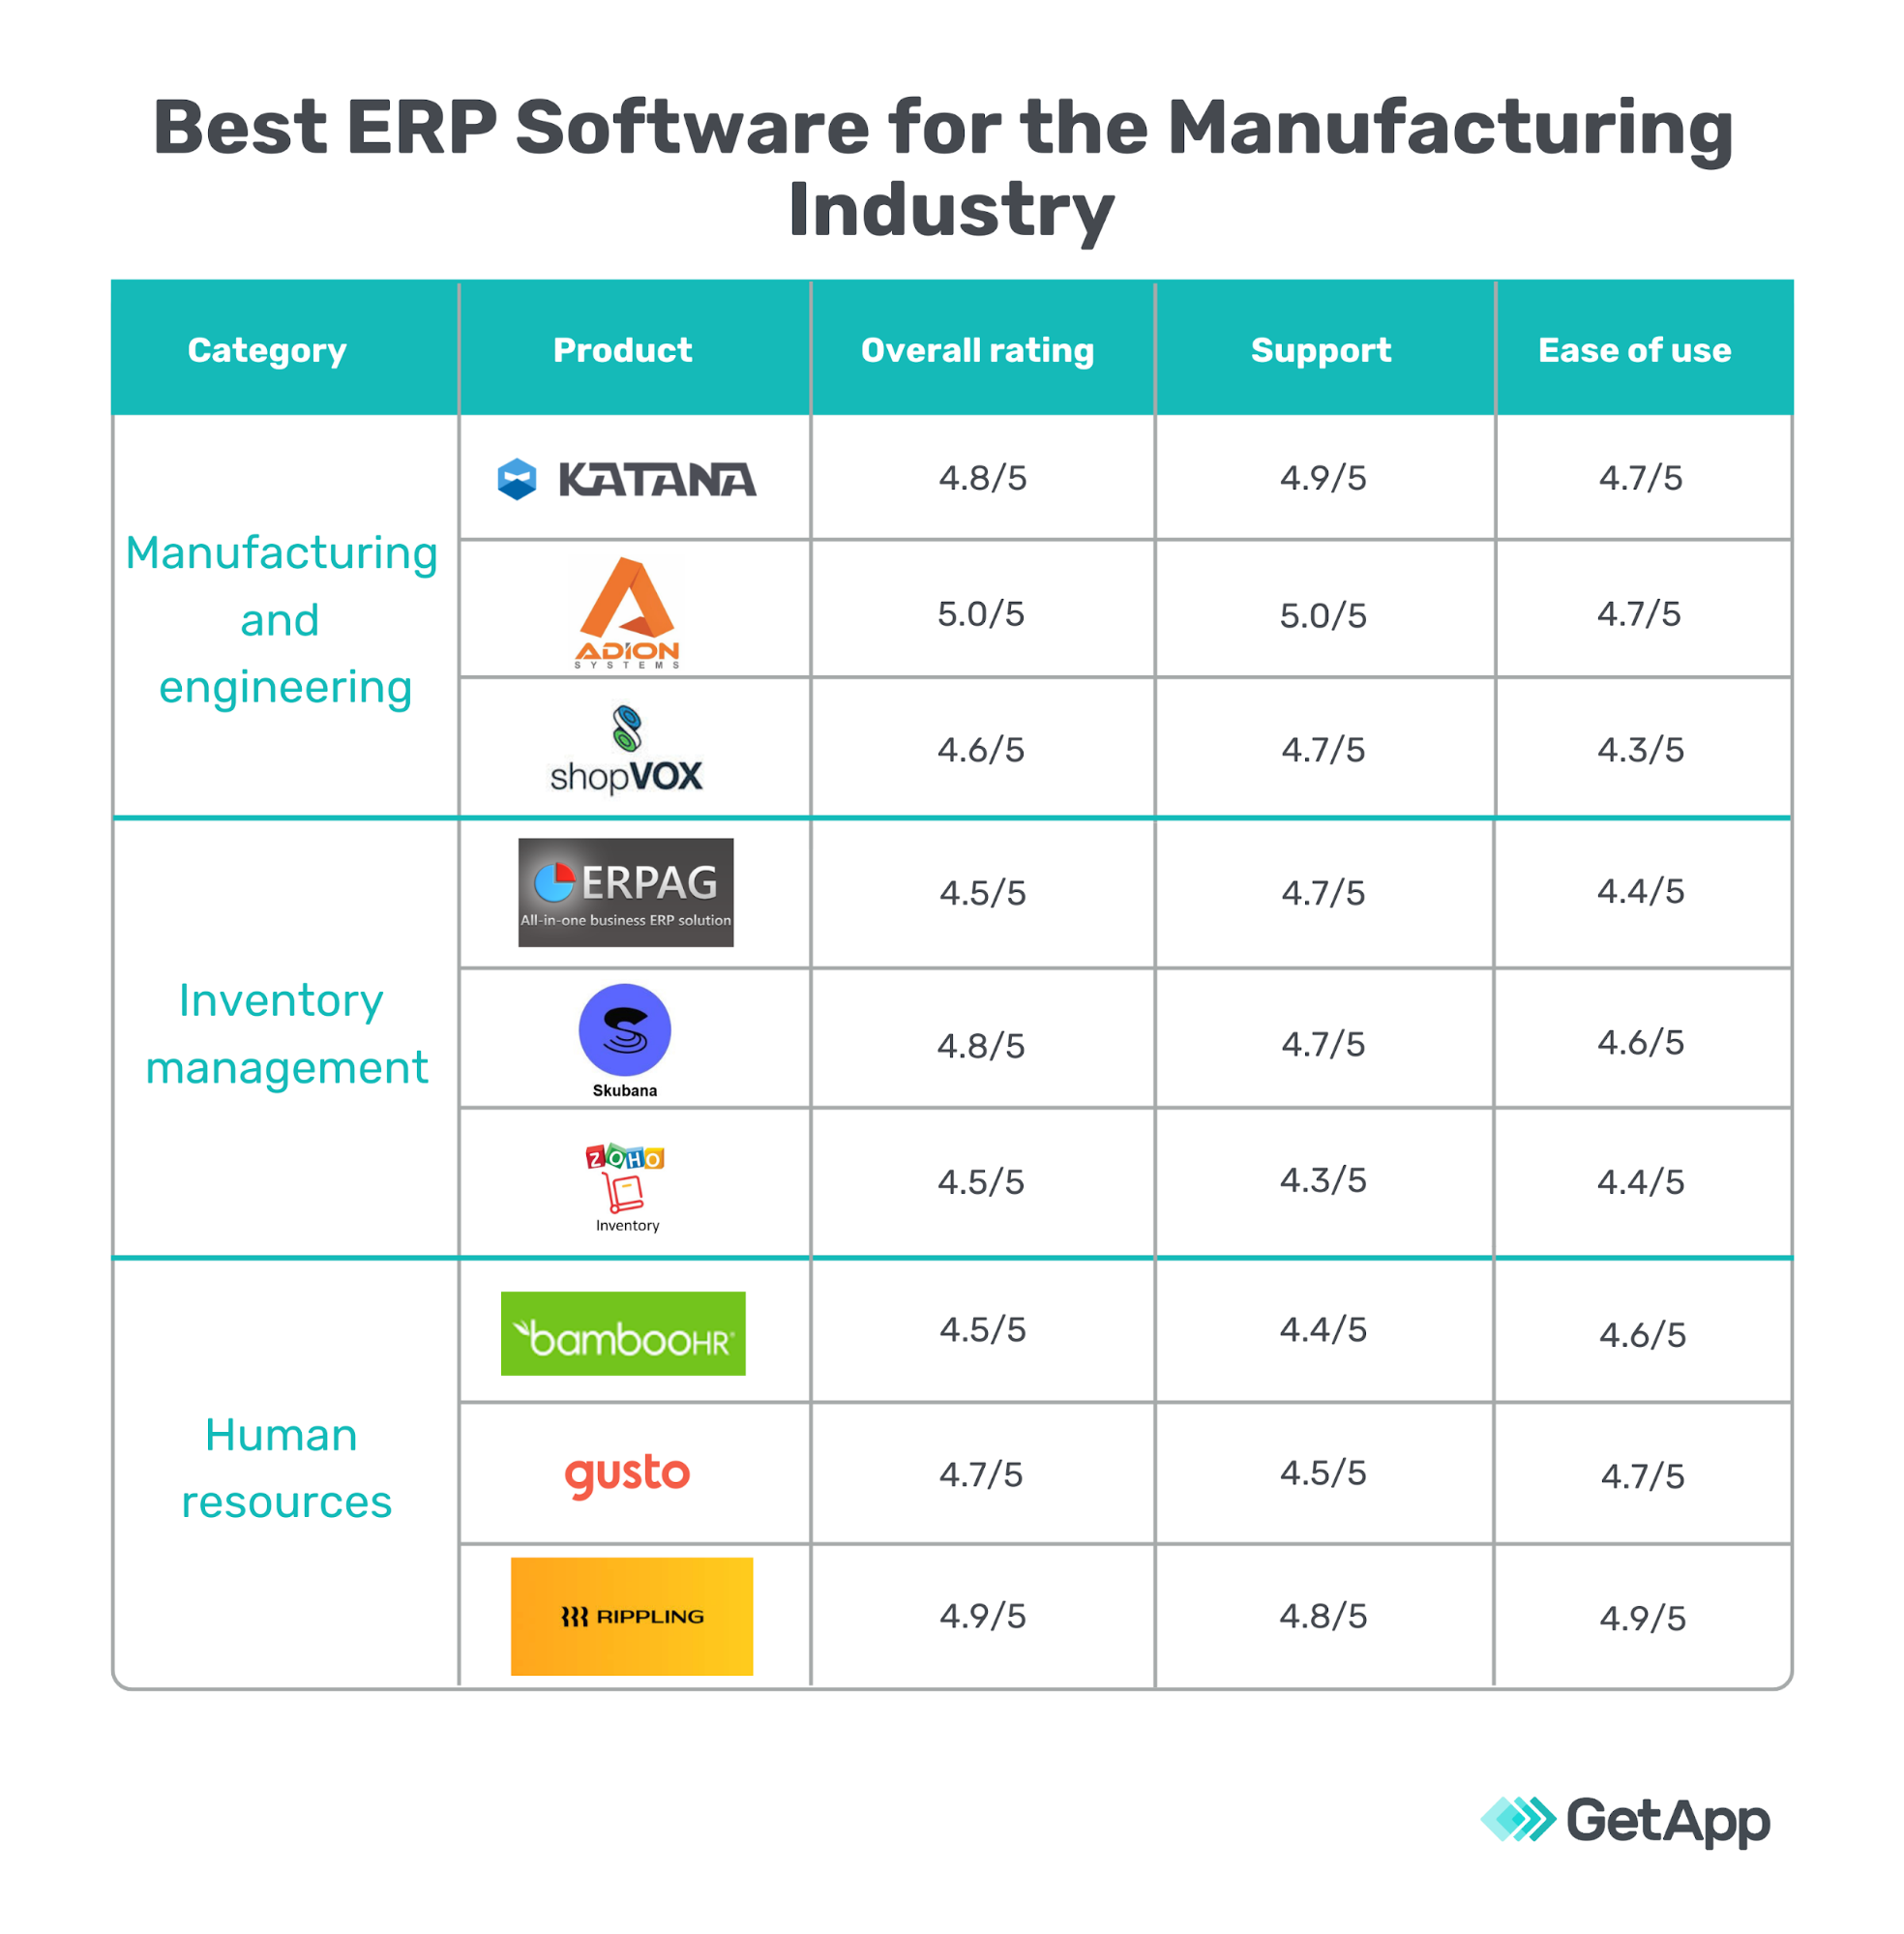 Best ERP Software for the Manufacturing Industry